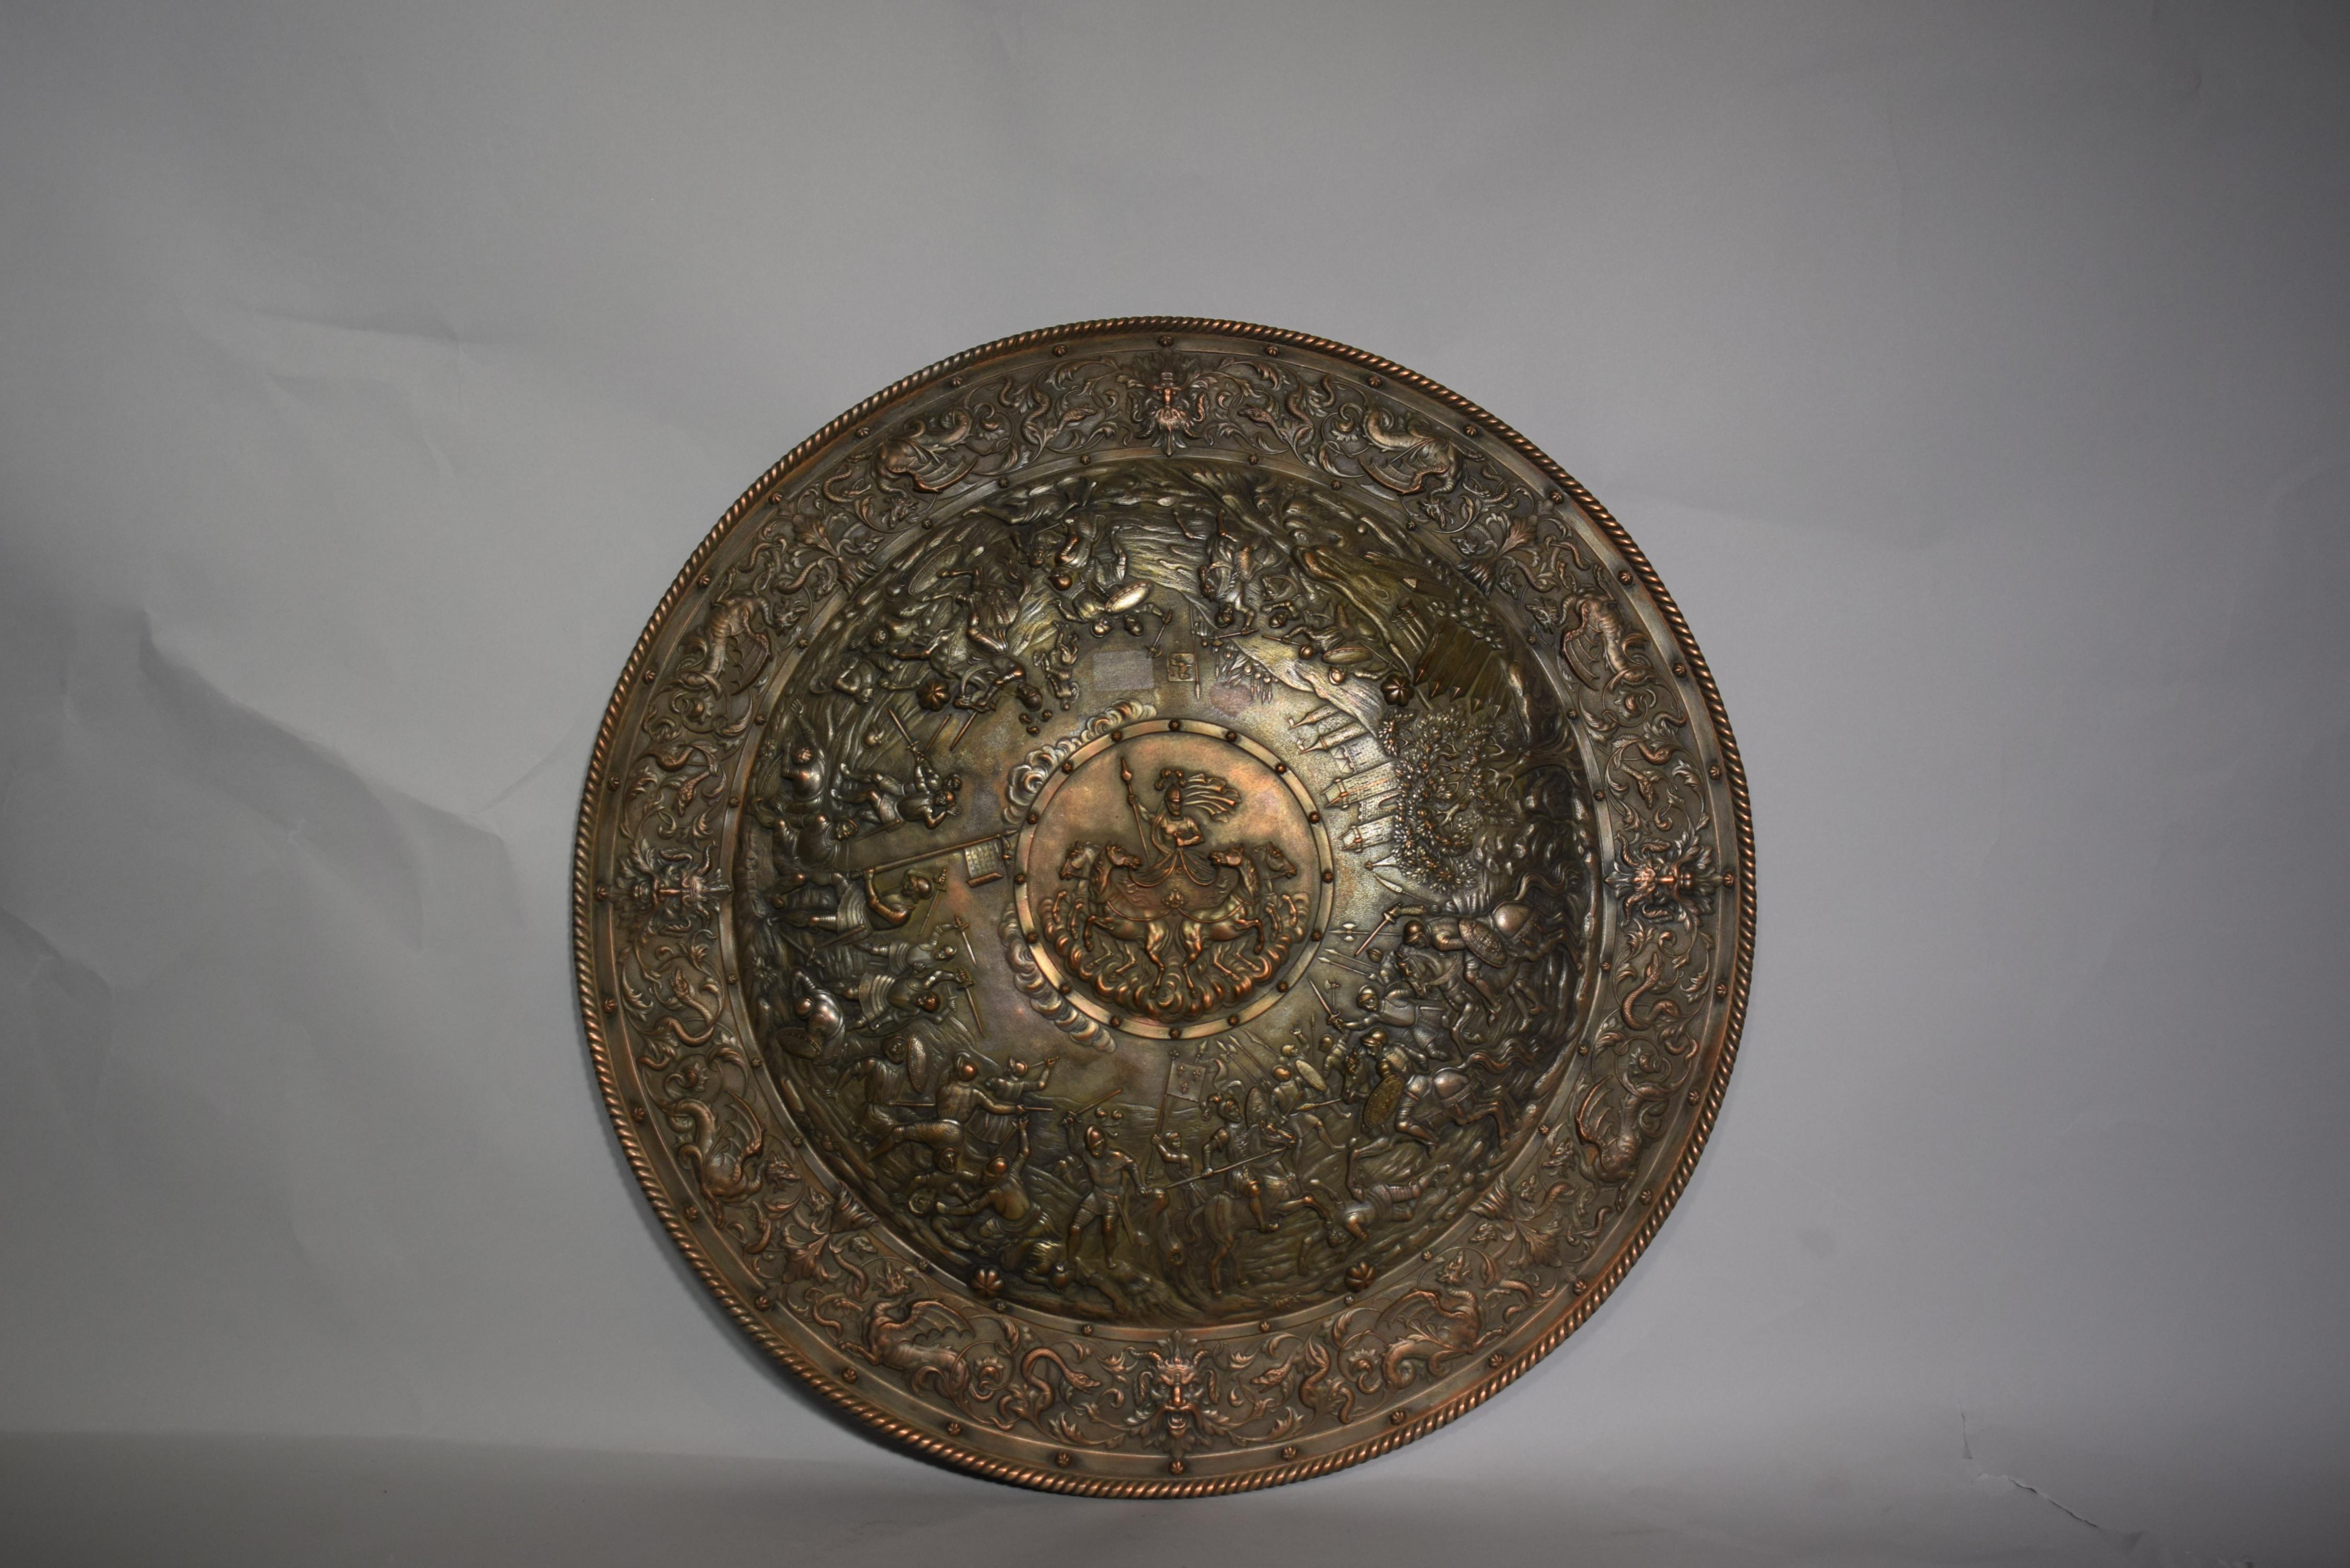 A superb silverplated circular shield depicting battle scene. Exquisite detail. England circa 1880.
Dimensions: Height 2 1/2